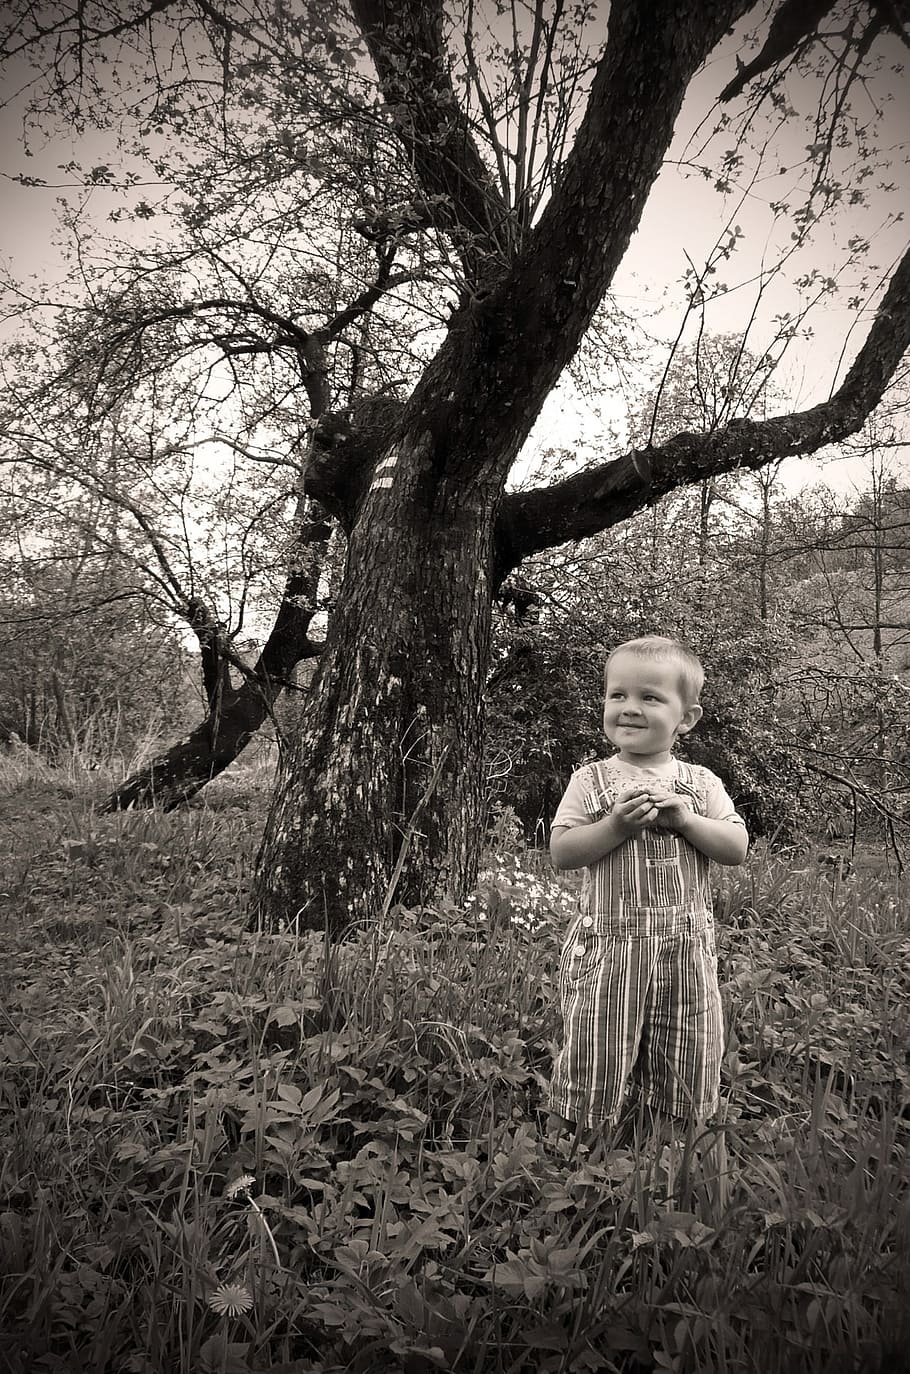 grayscale photography, boy, standing, tree, child, young, people, look, seasons, summer